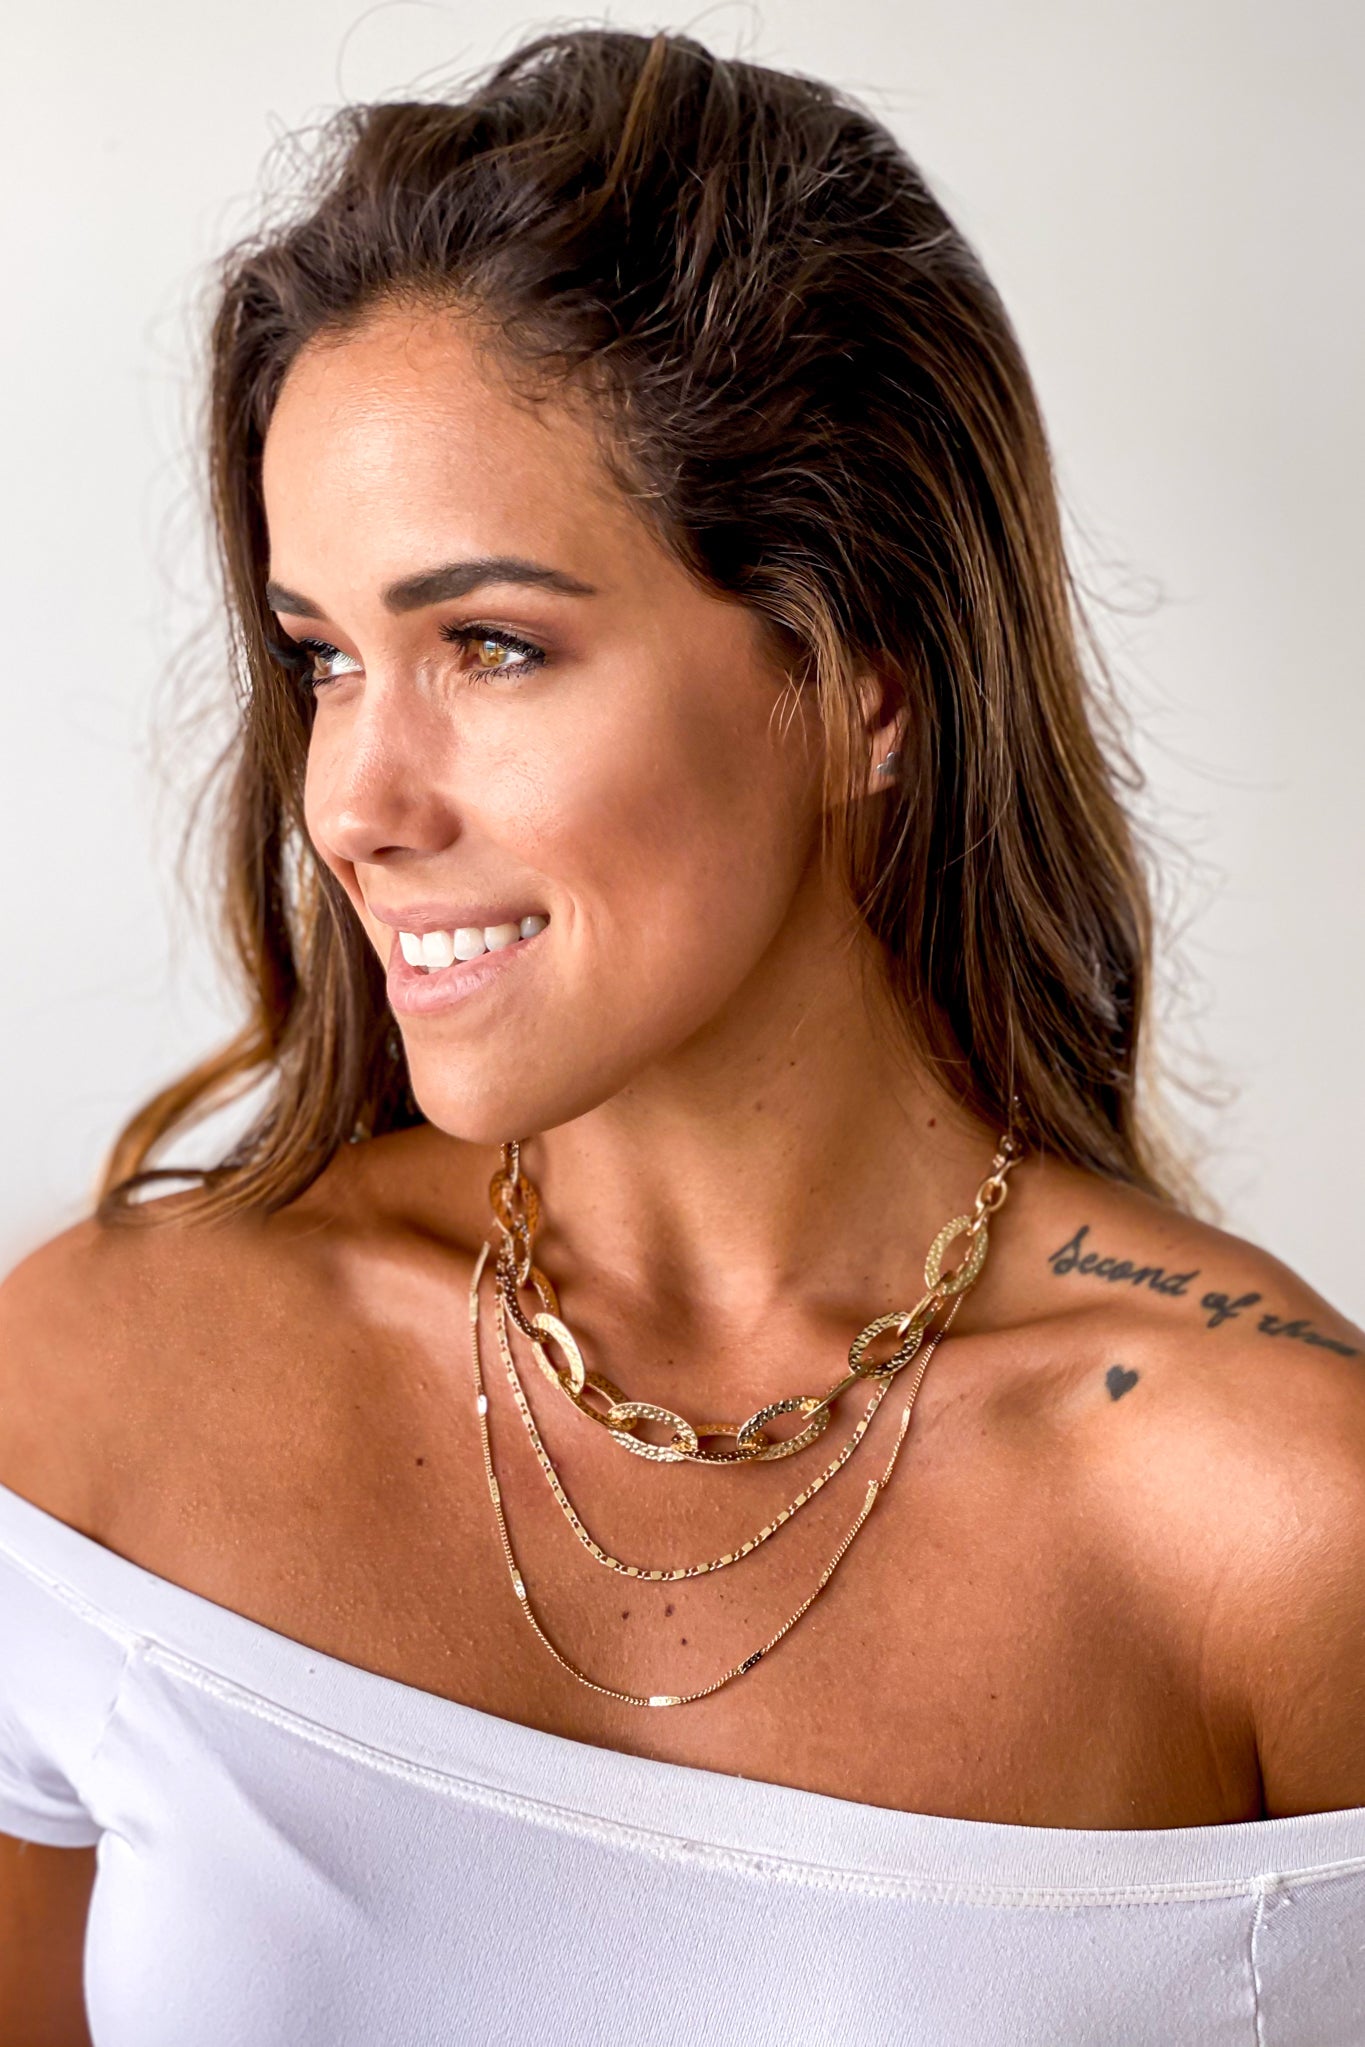 Gold Layered Hammered Link Chain Necklace